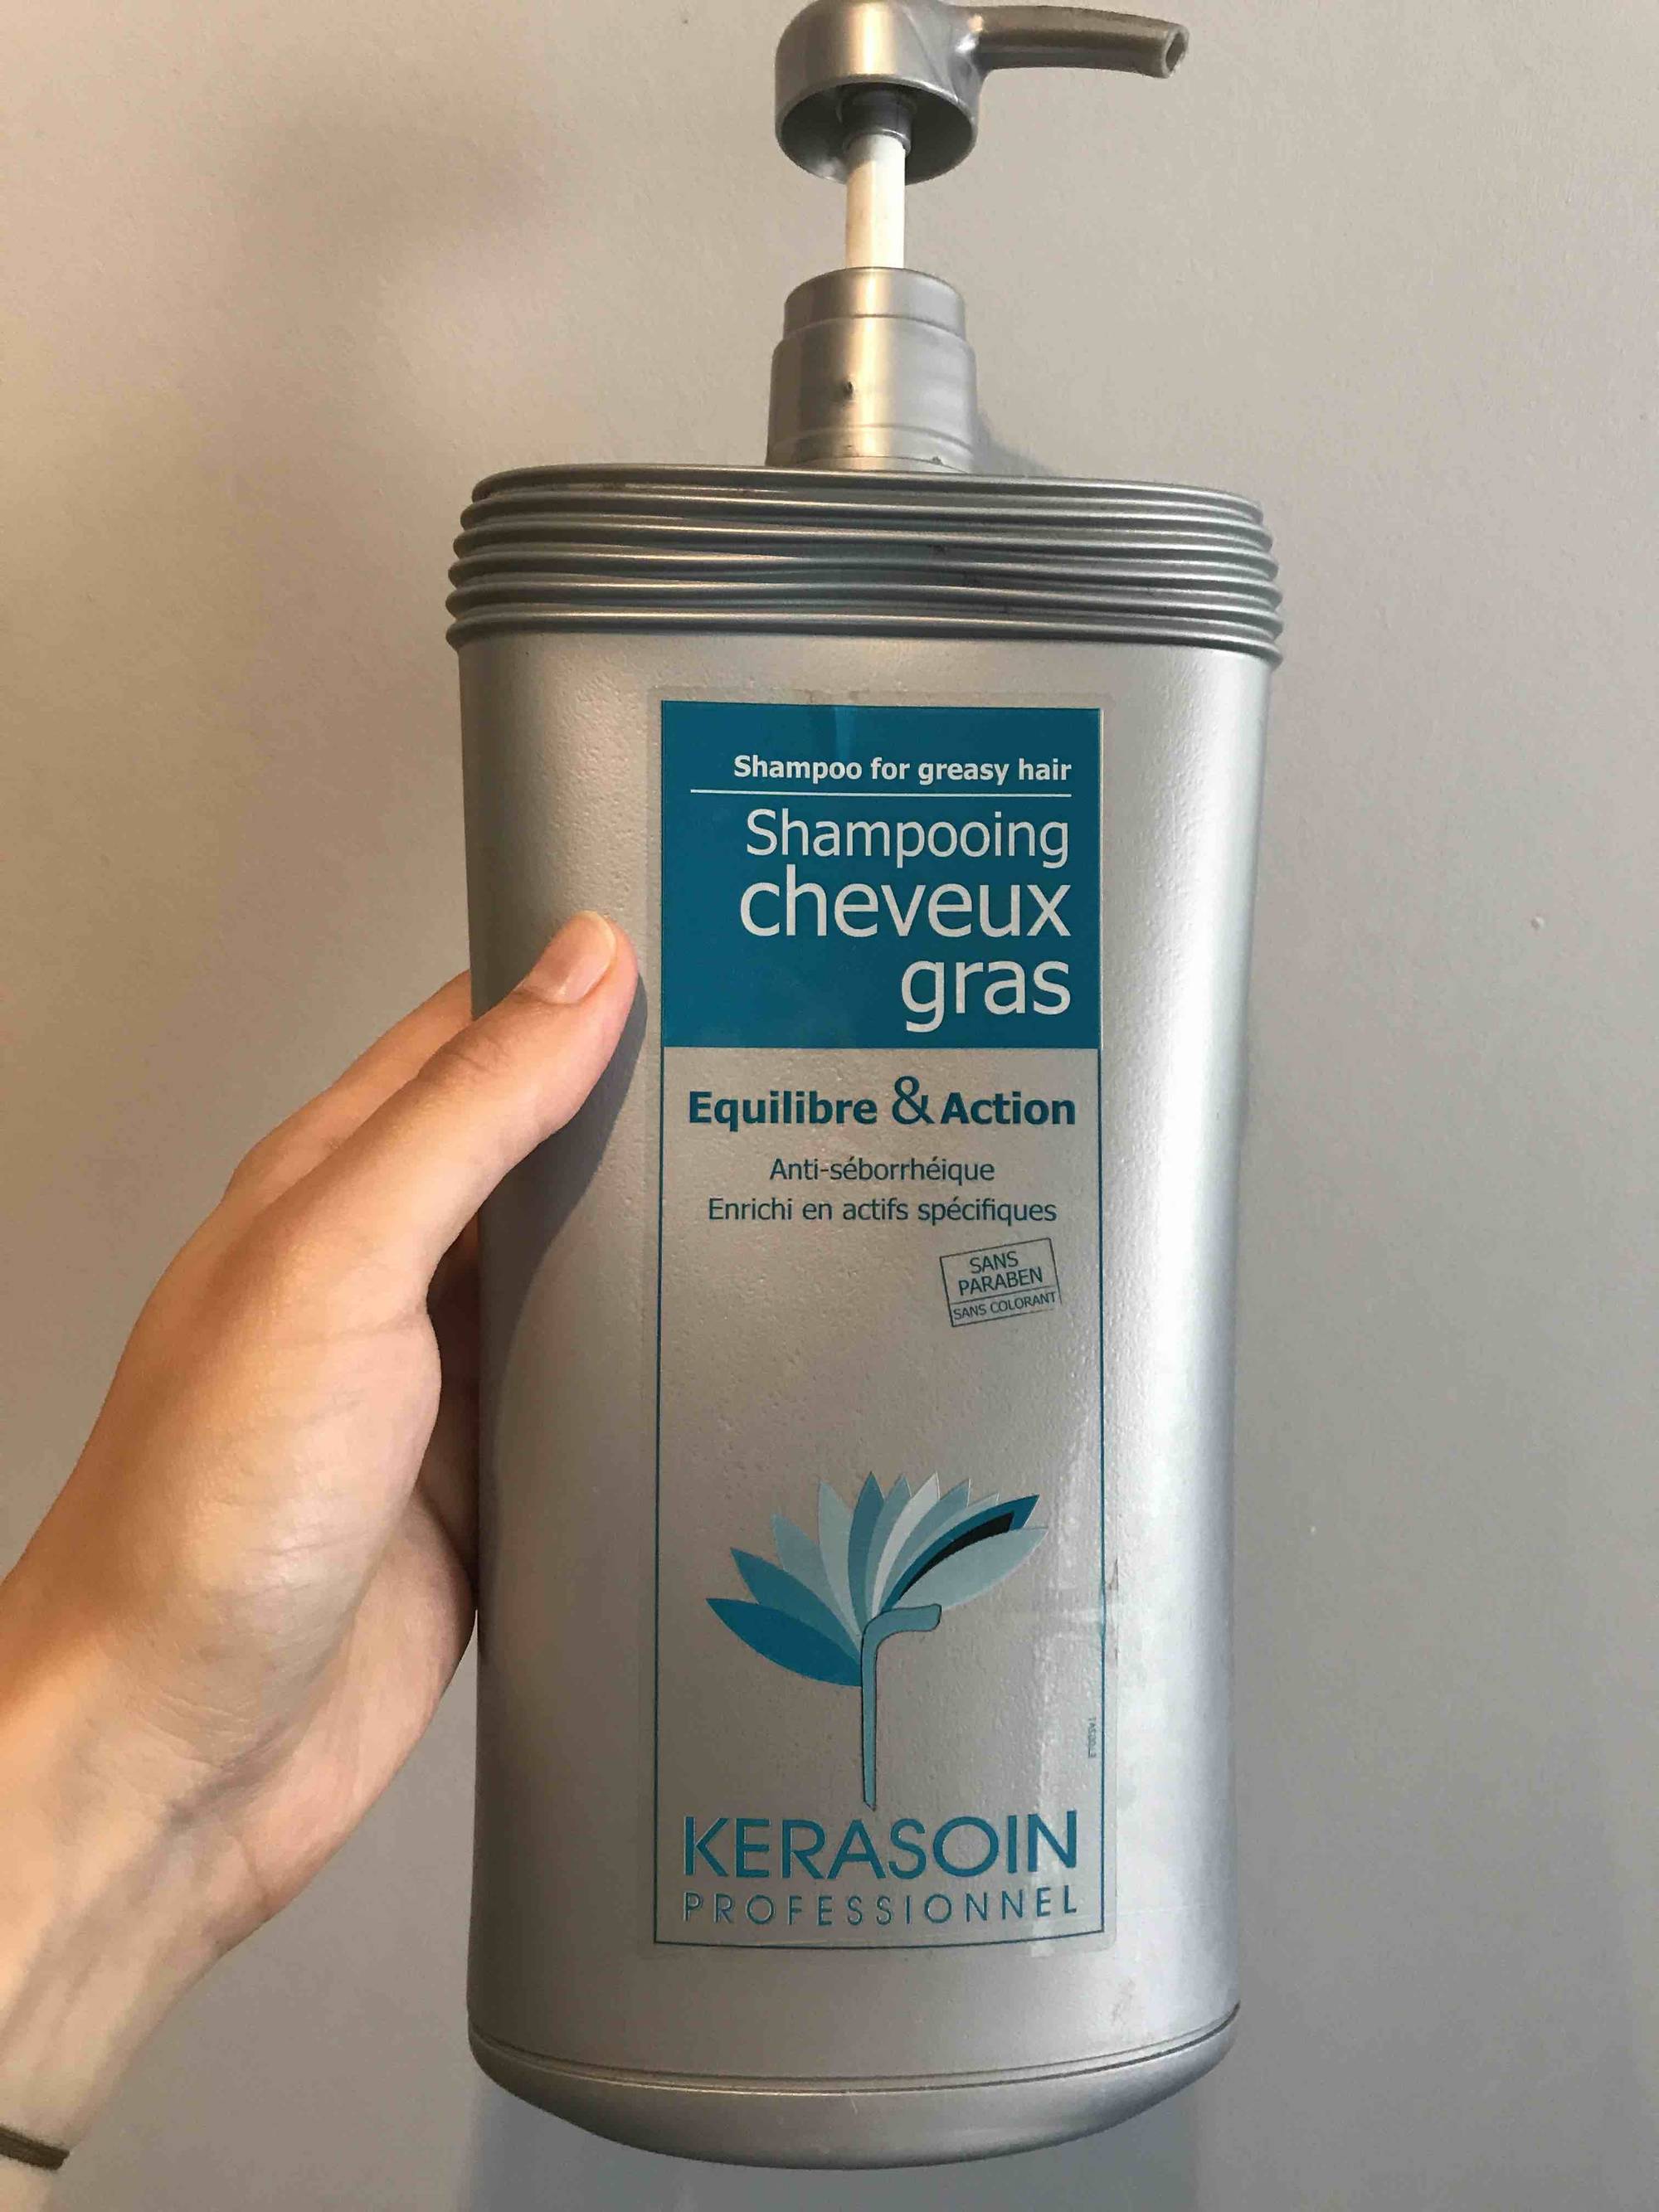 KERASOIN - Shampooing cheveux gras - Equilibre & action